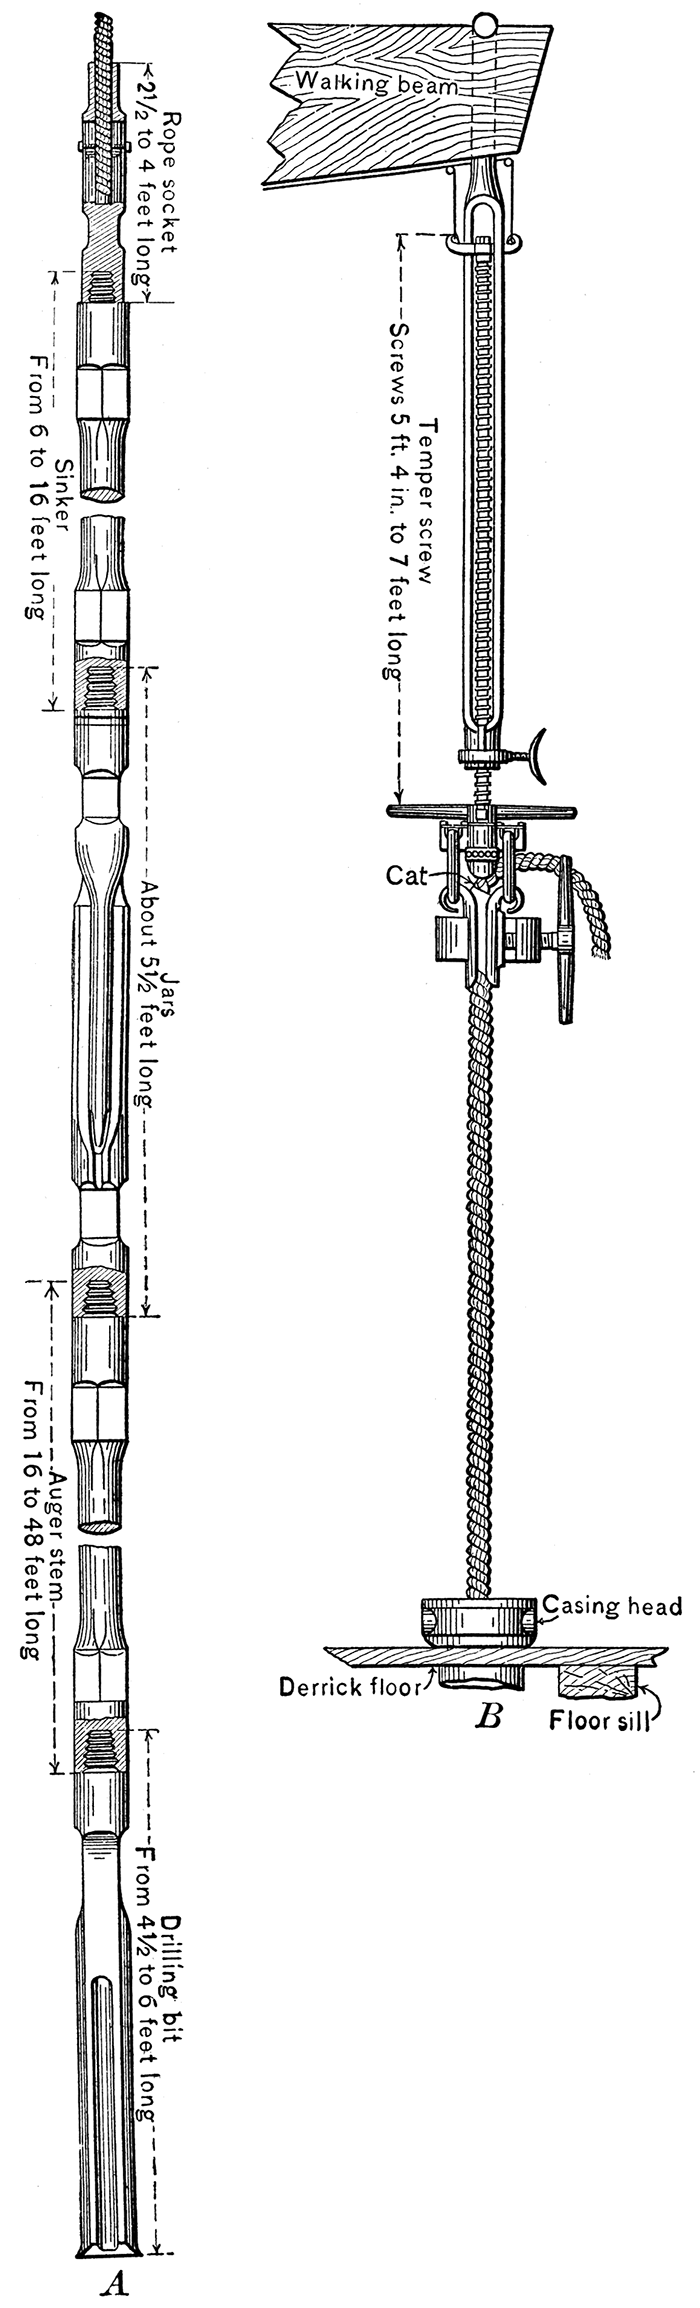 String of tools used with standard drilling outfit